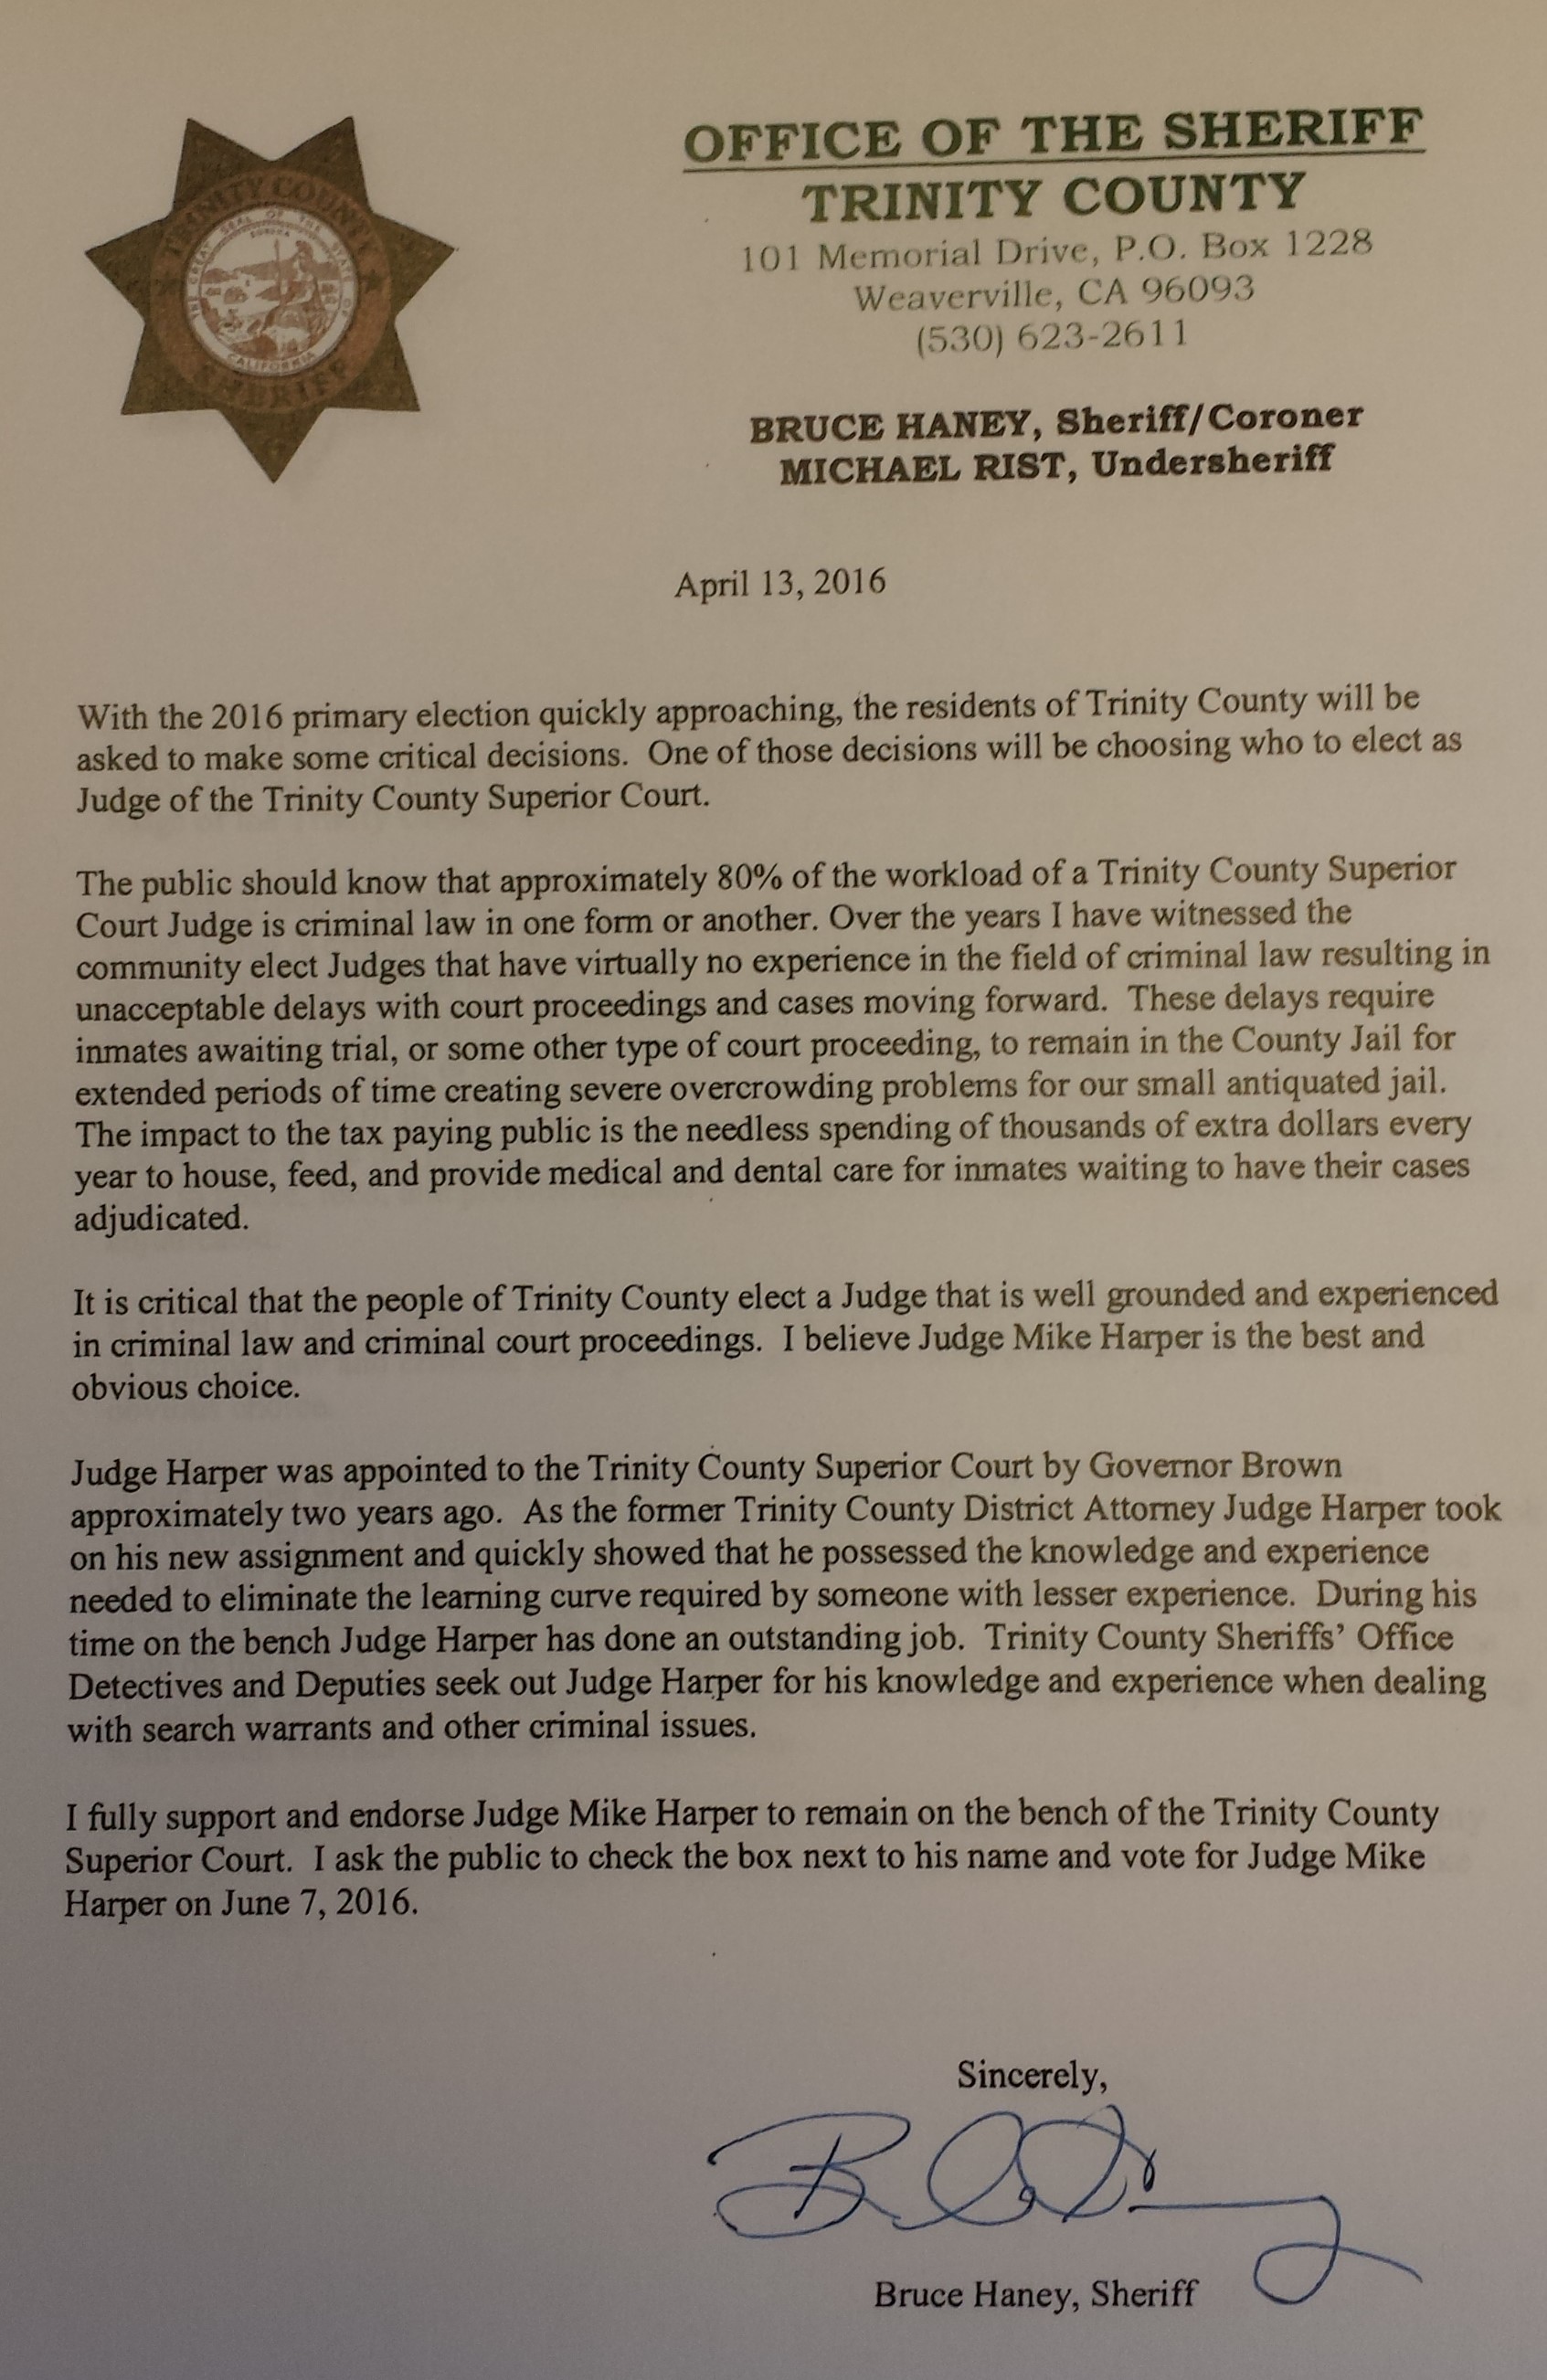 support letter from Sheriff Bruce Haney